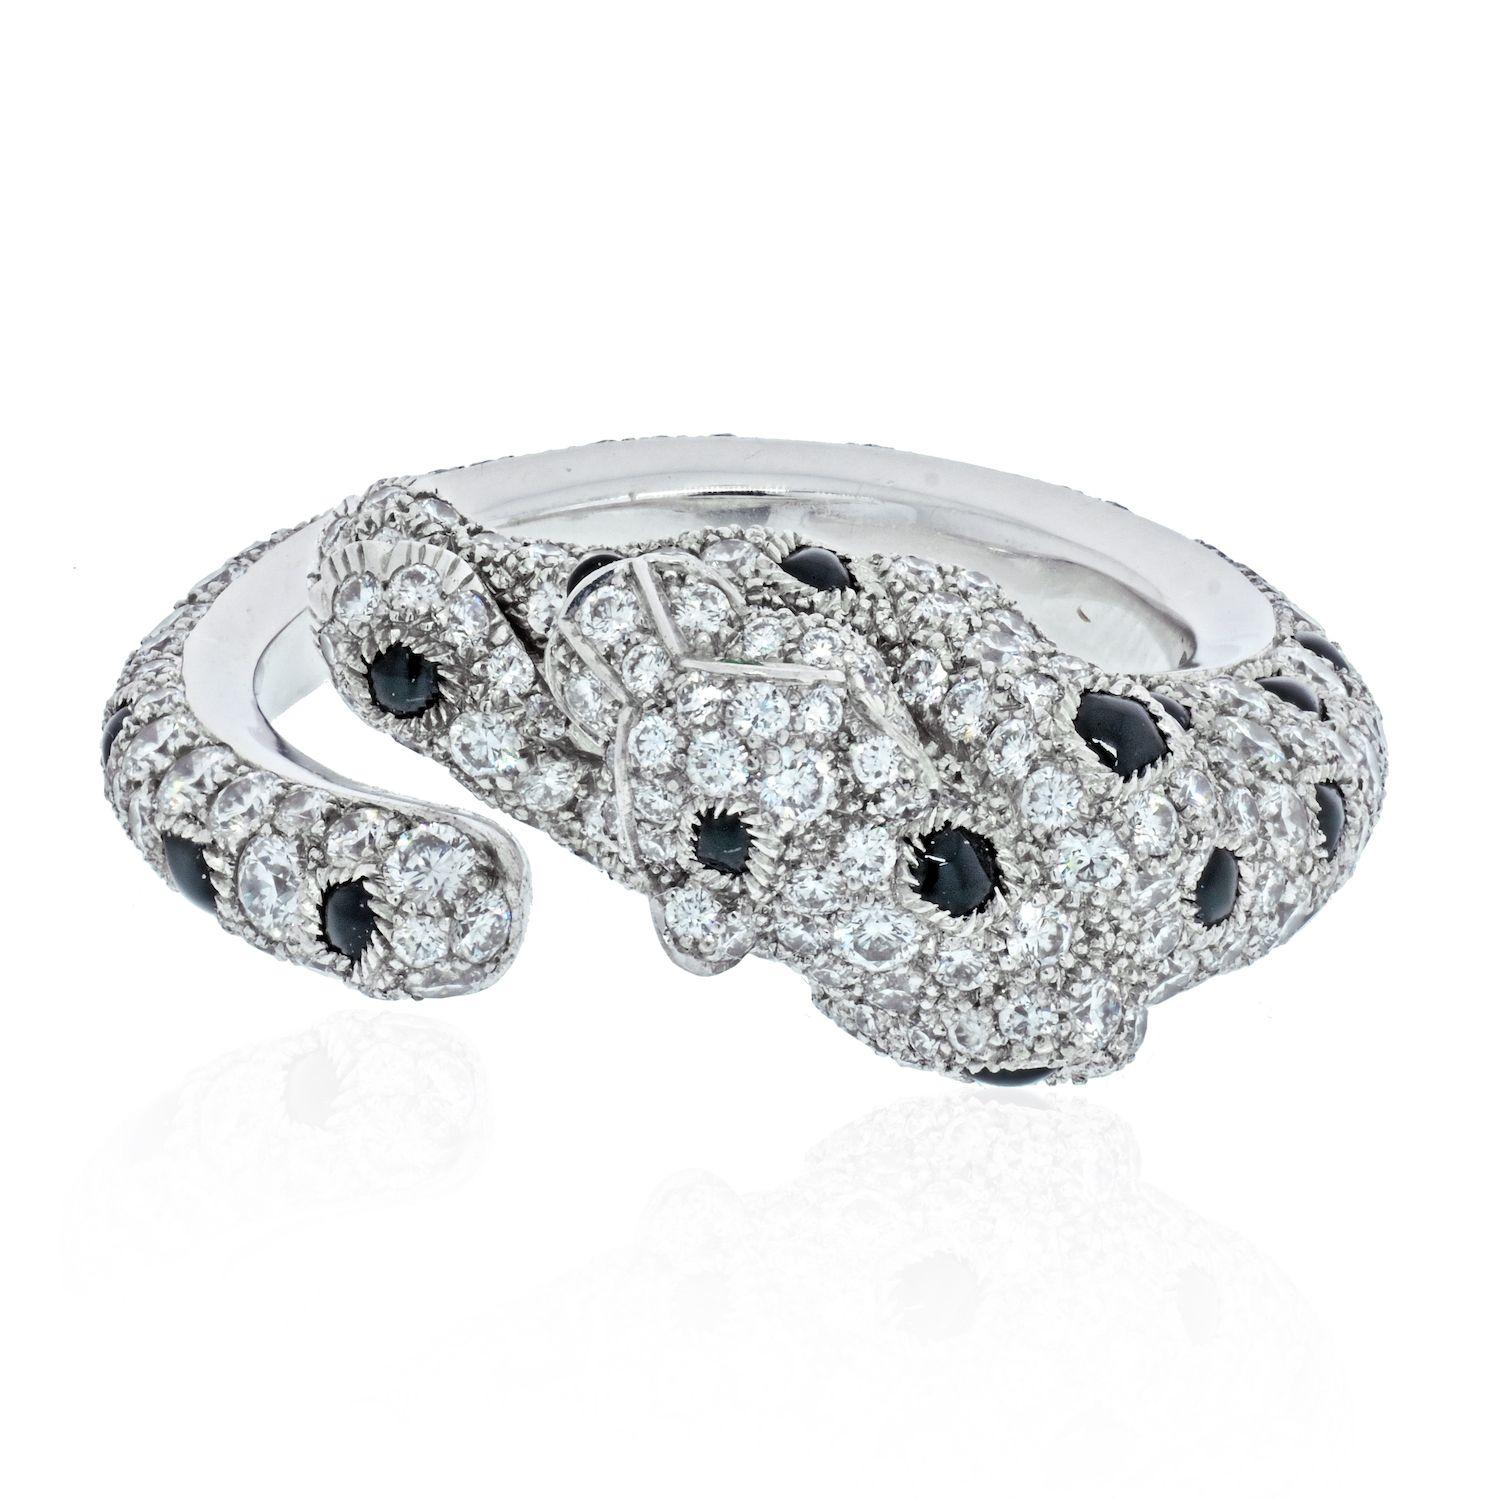 Modern Cartier 18k White Gold Panthere Diamond and Onyx Ring